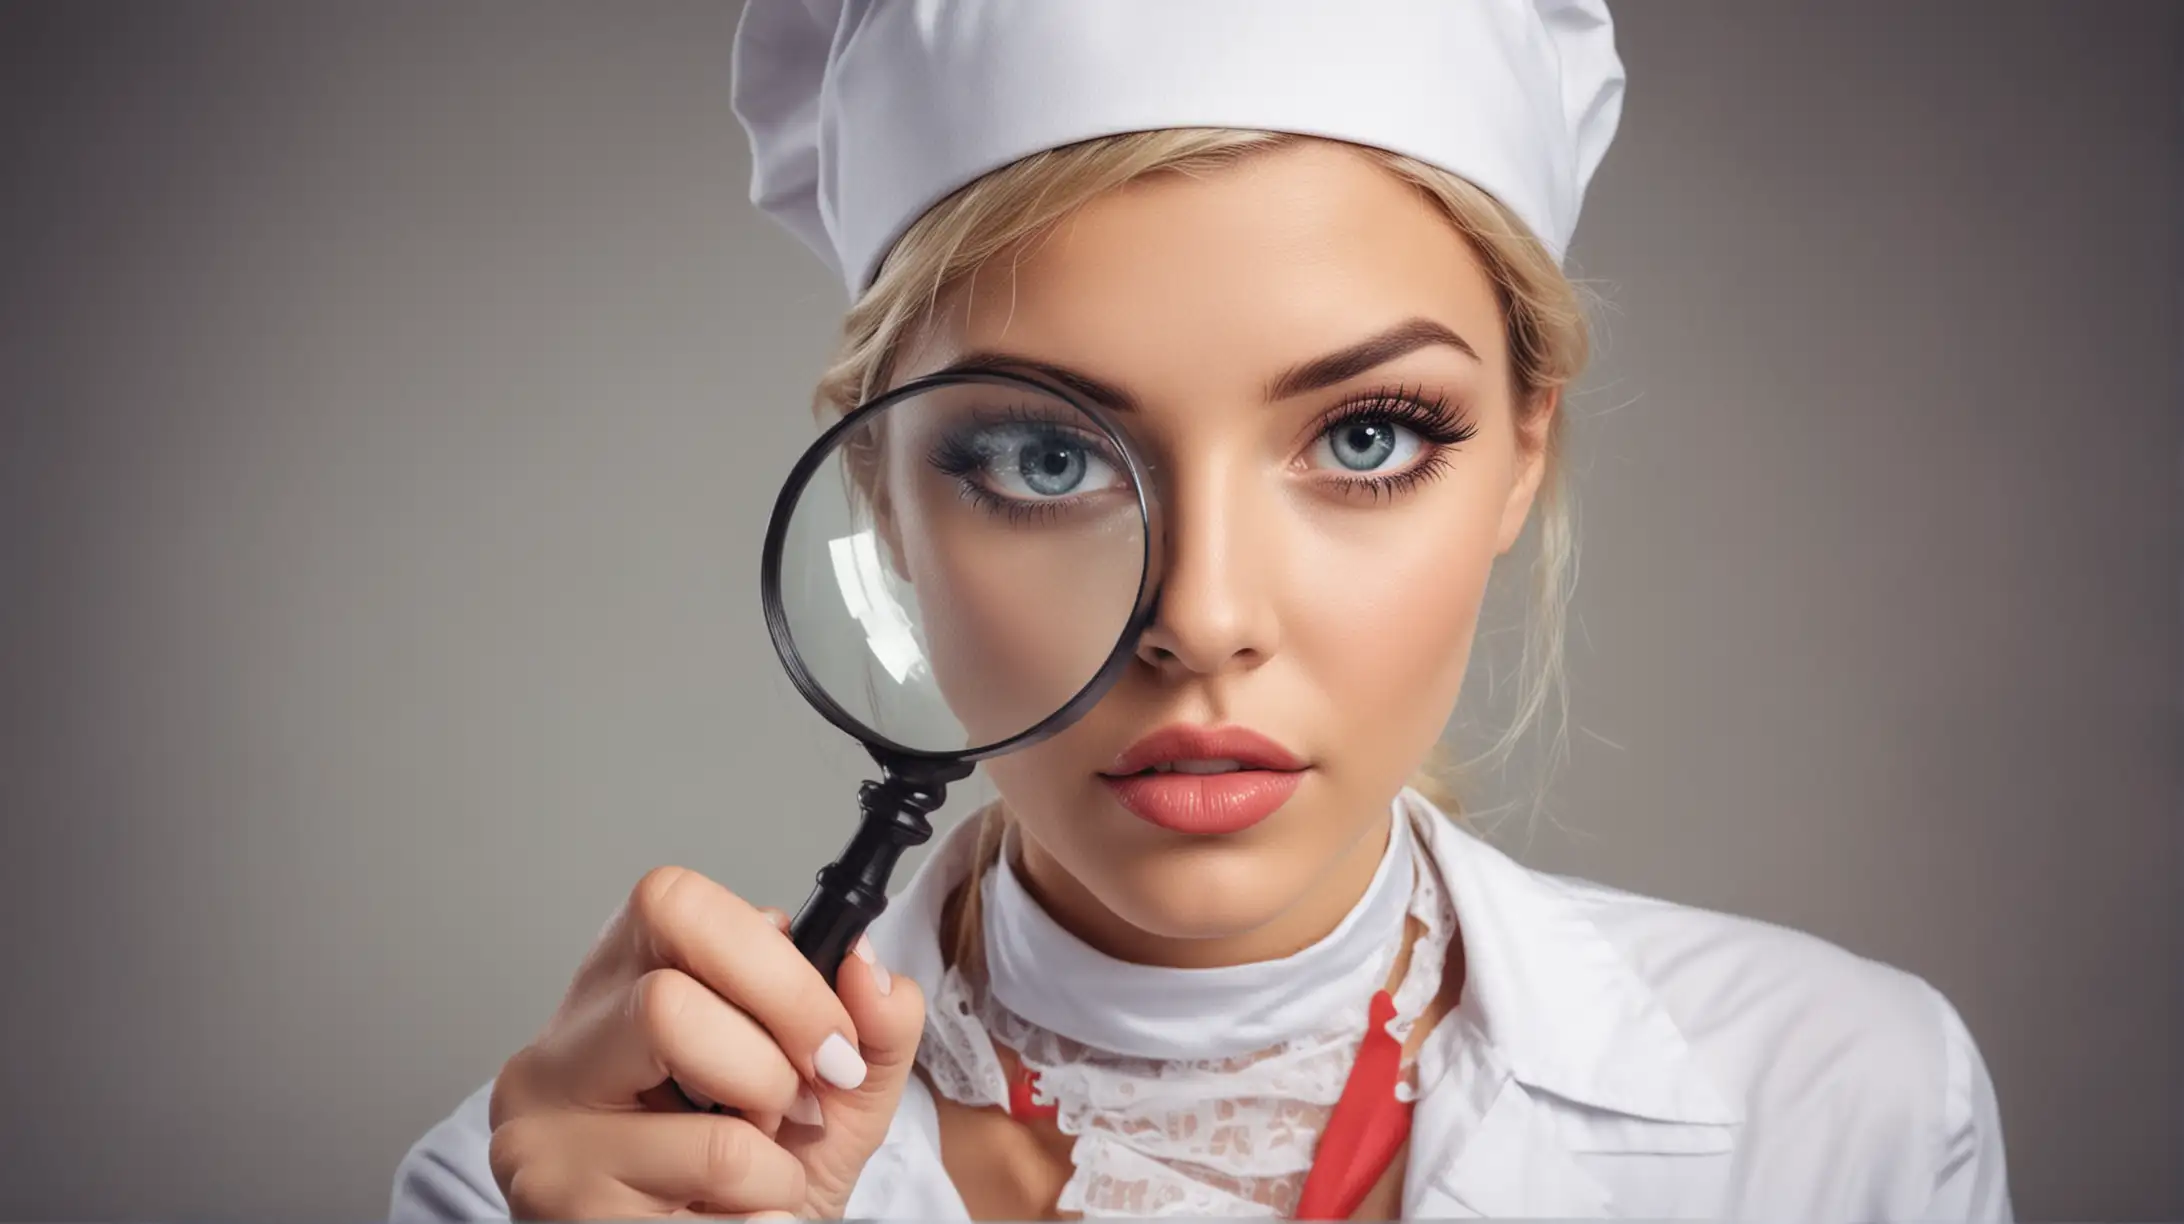 Seductive Nurse Examining Patient with Magnifying Glass